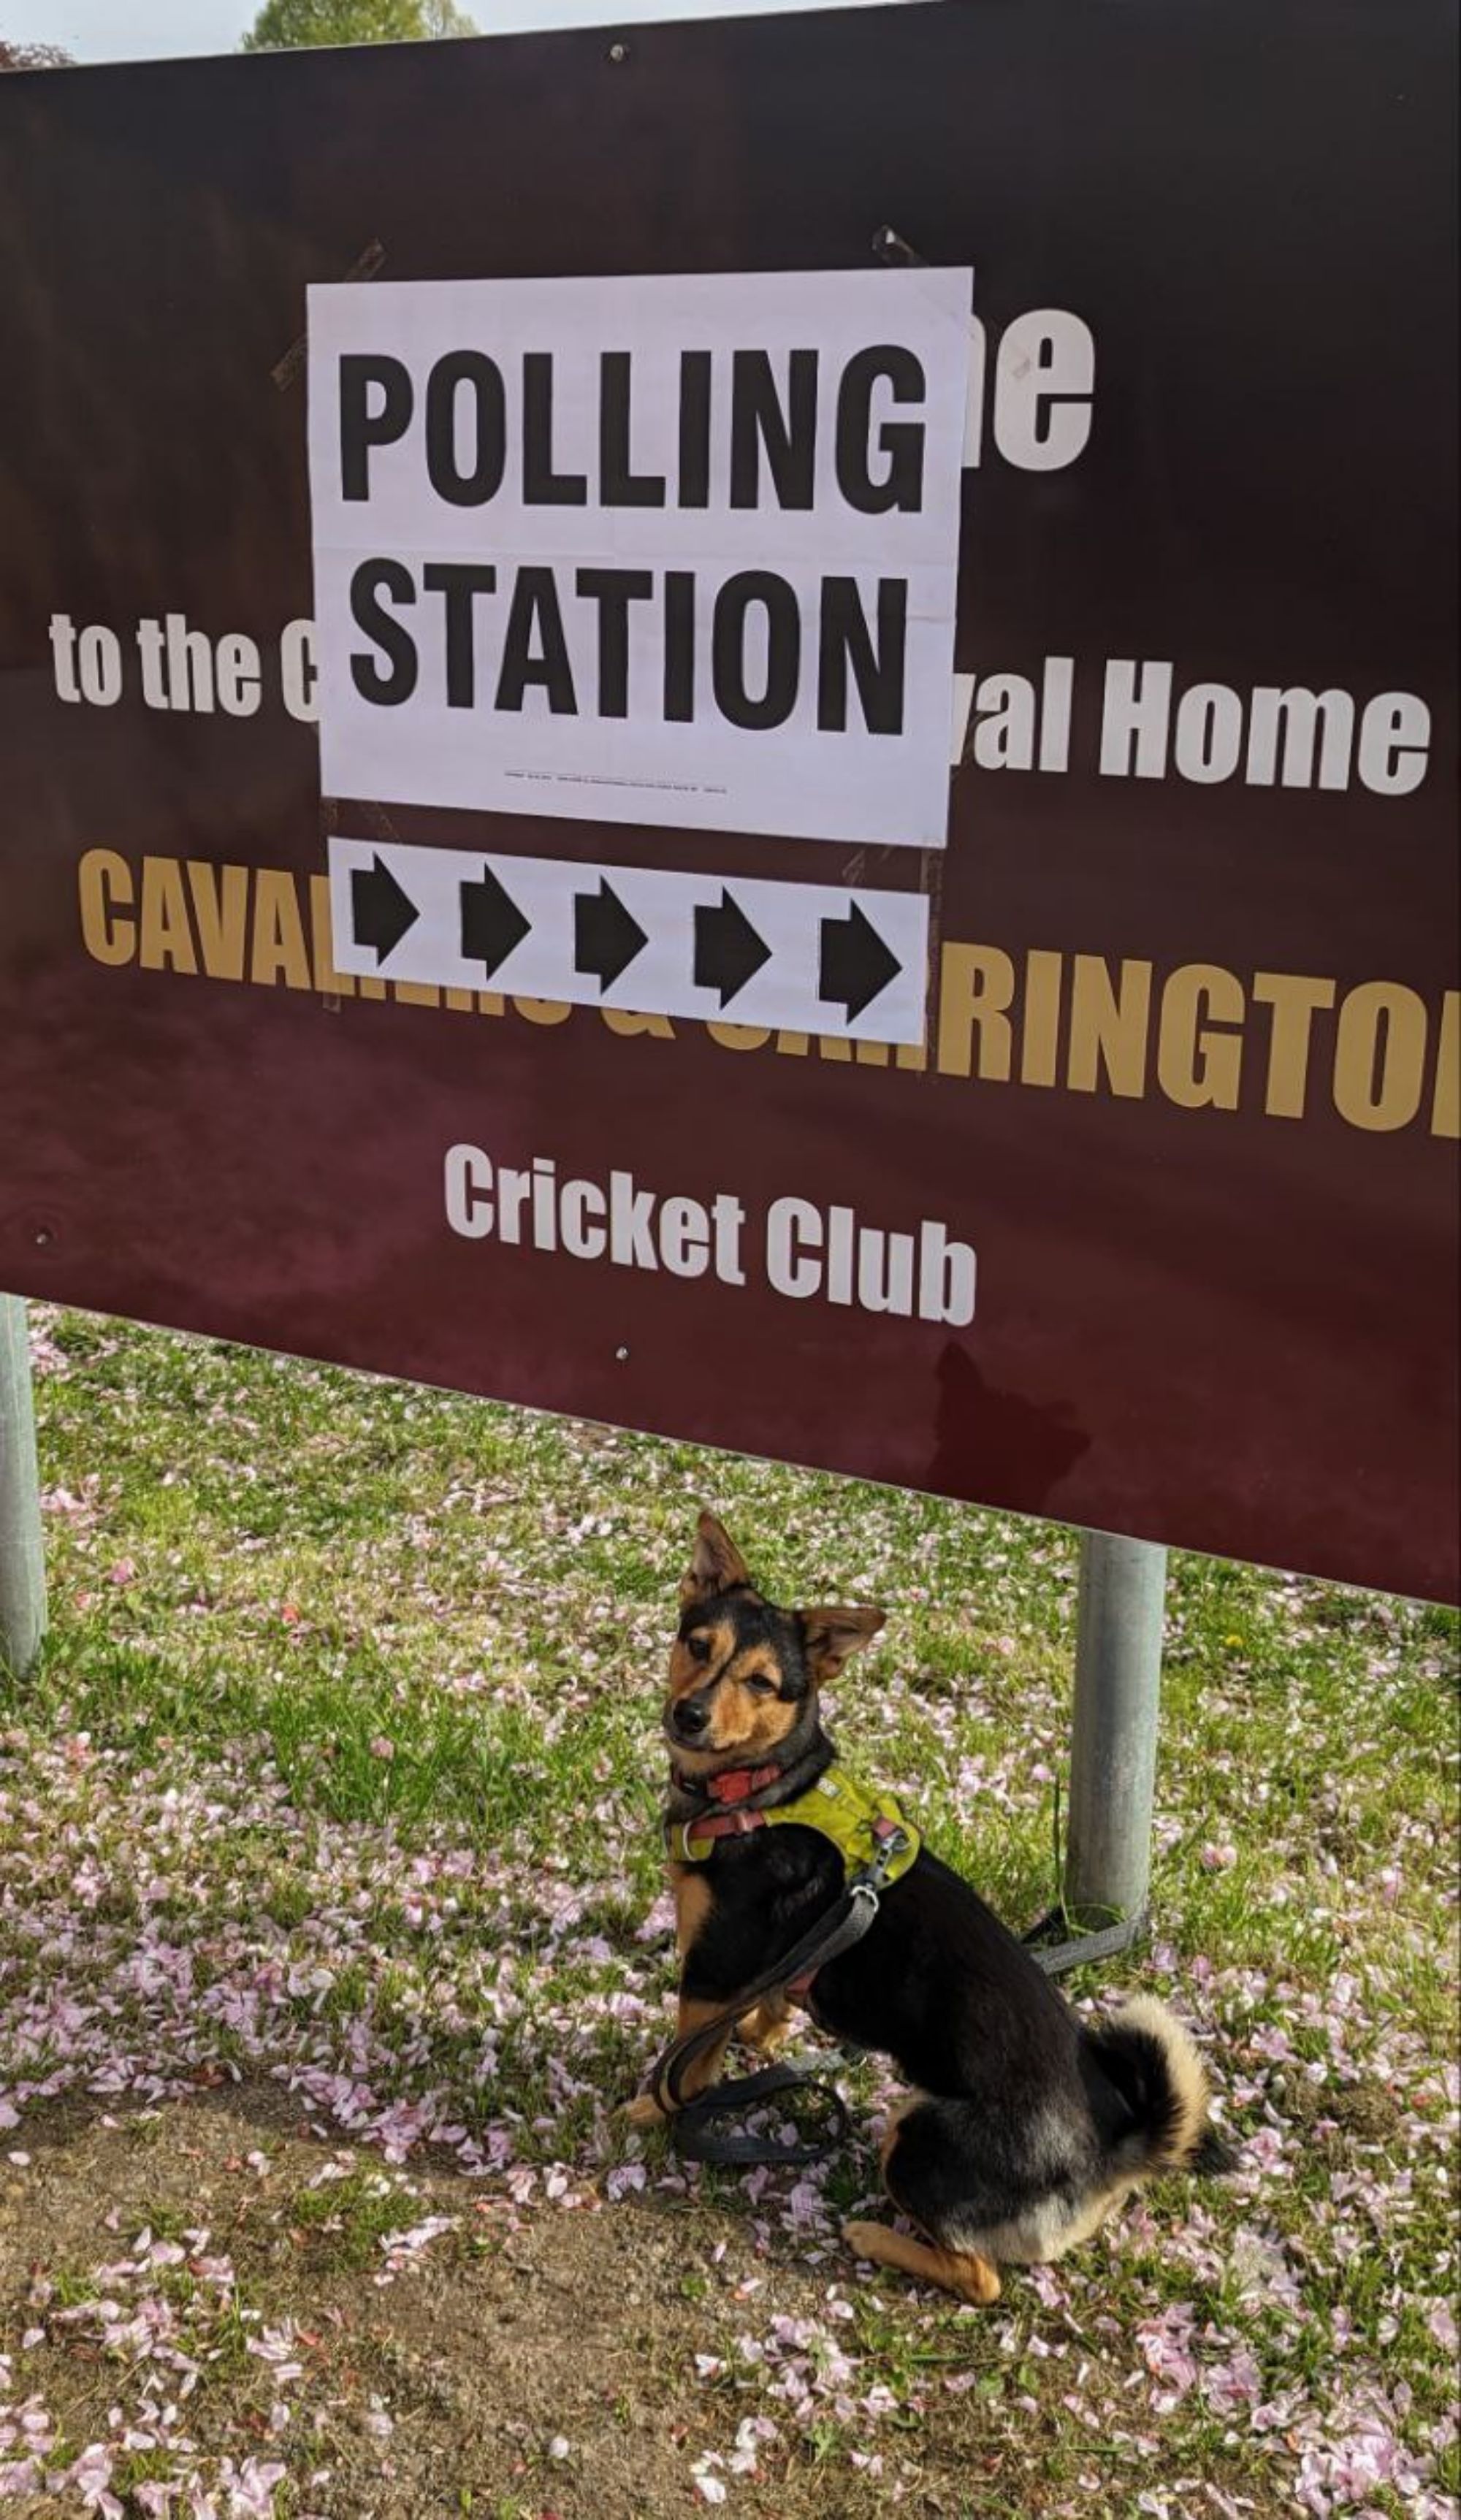 Cookie the dog sitting under a sign that reads "polling station ðŸ‘‰ðŸ‘‰", looking slightly puzzled as to why she's been asked to have a photo here, but seems happy enough to be supporting democracy